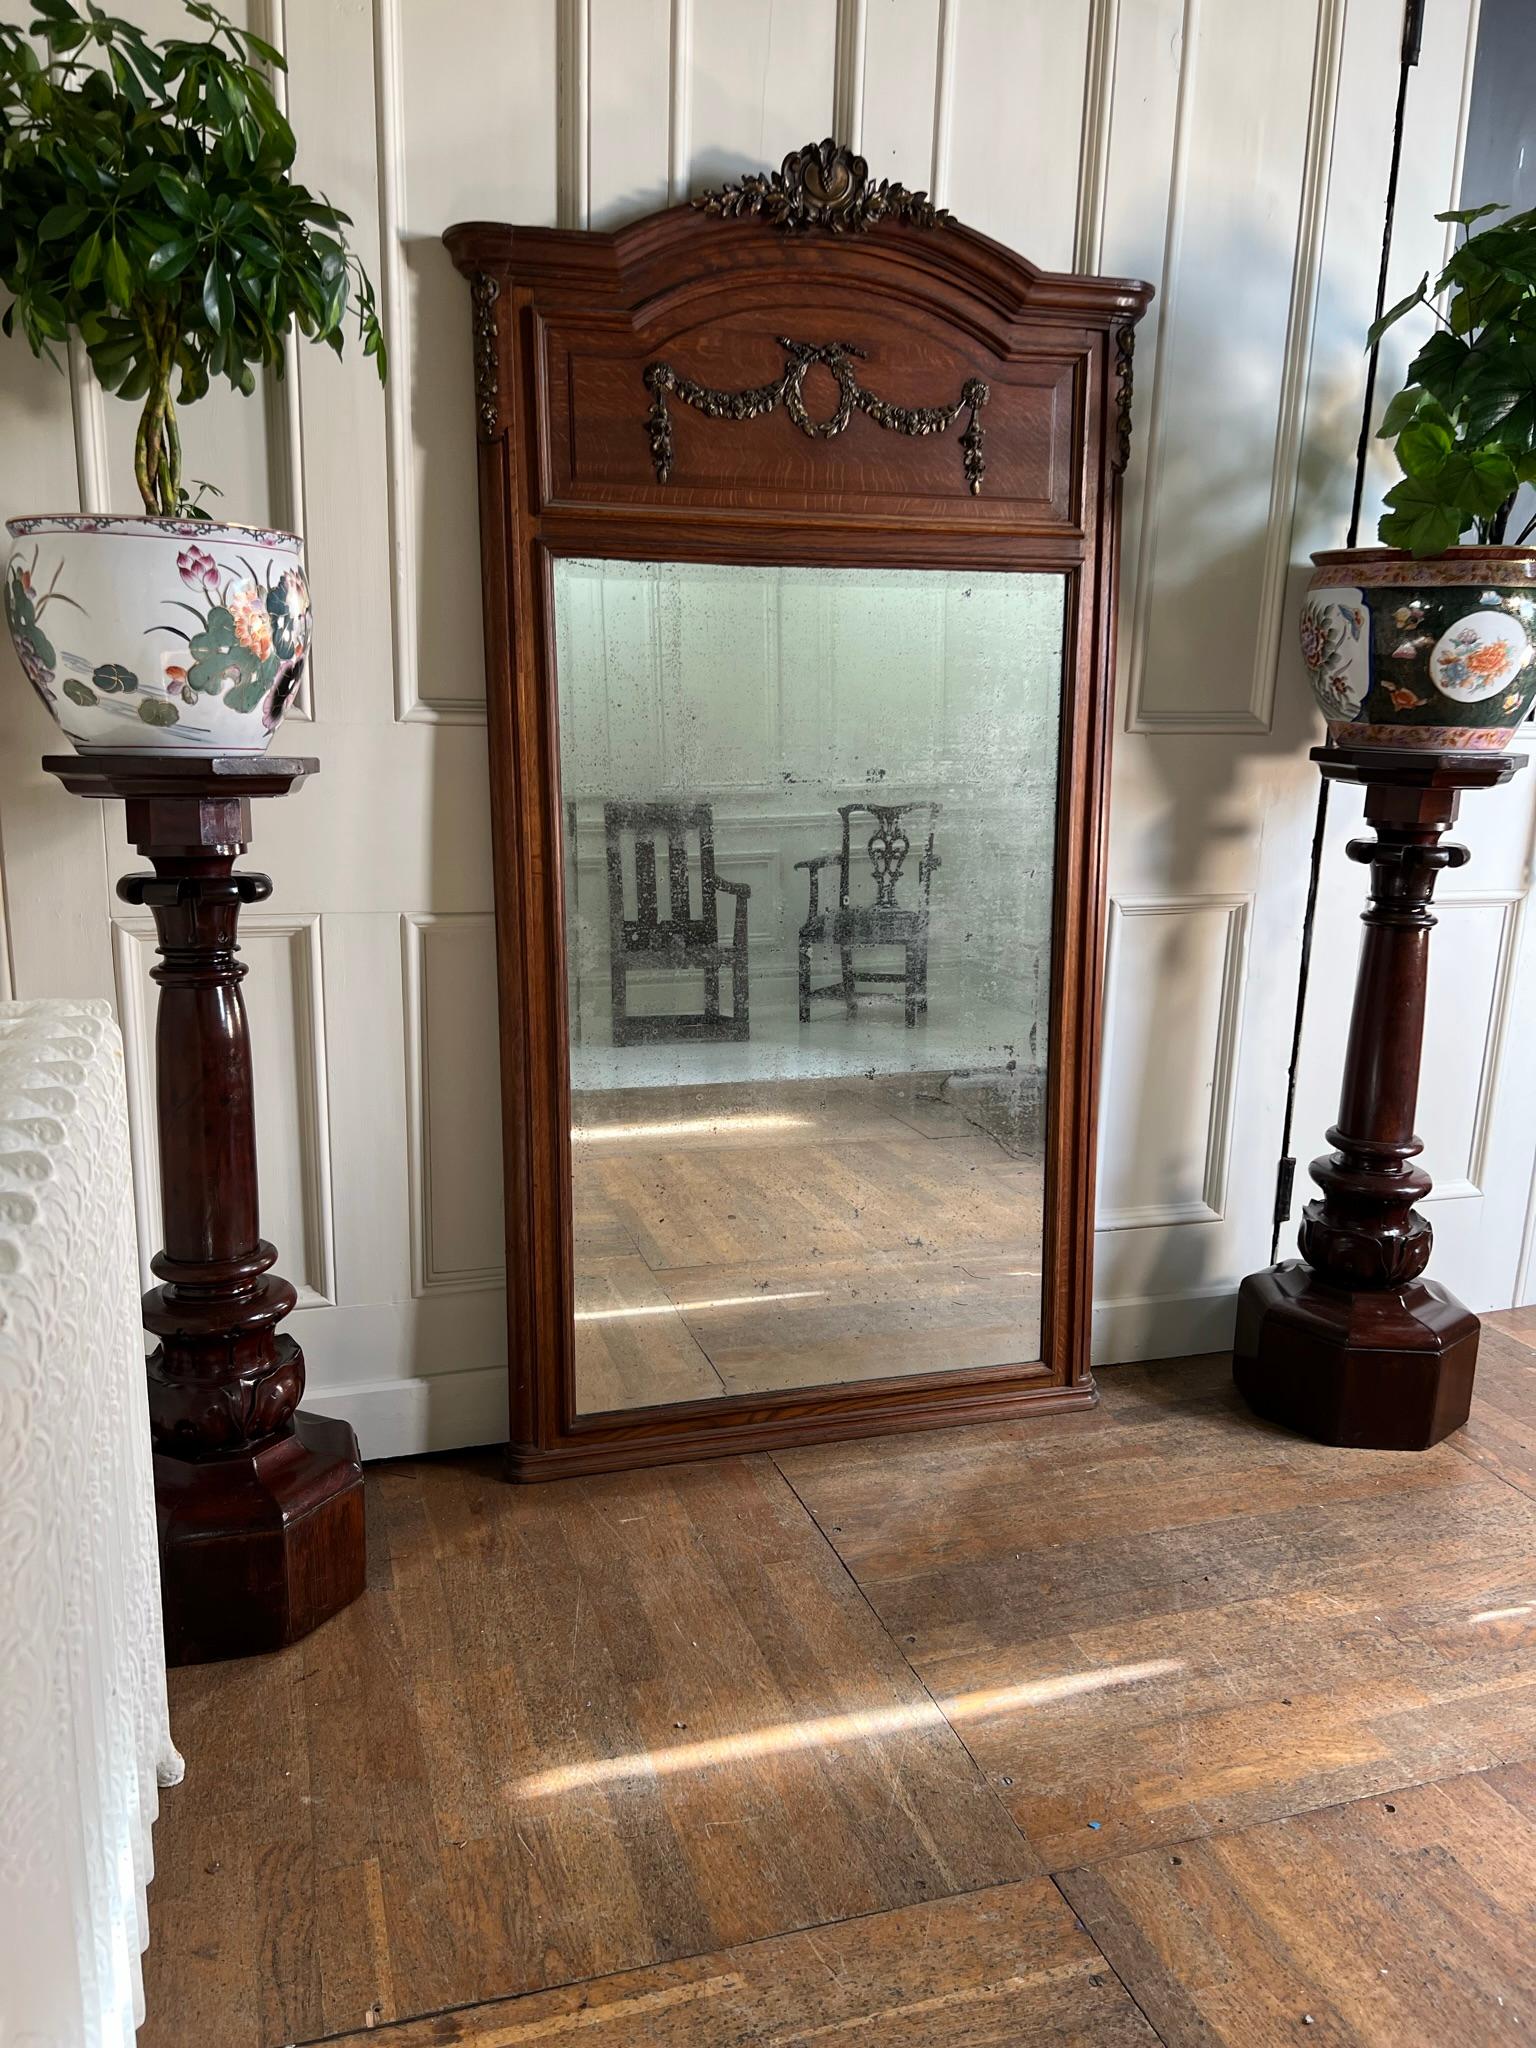 Early 20th century French oak over mantle mirror.

Beautifully foxed mirror with just the right amount of wear to be functional and decorative.

Measurements: 178cm h x 98cm w x 5cm d
(measurements are approximate and are taken at the maximum